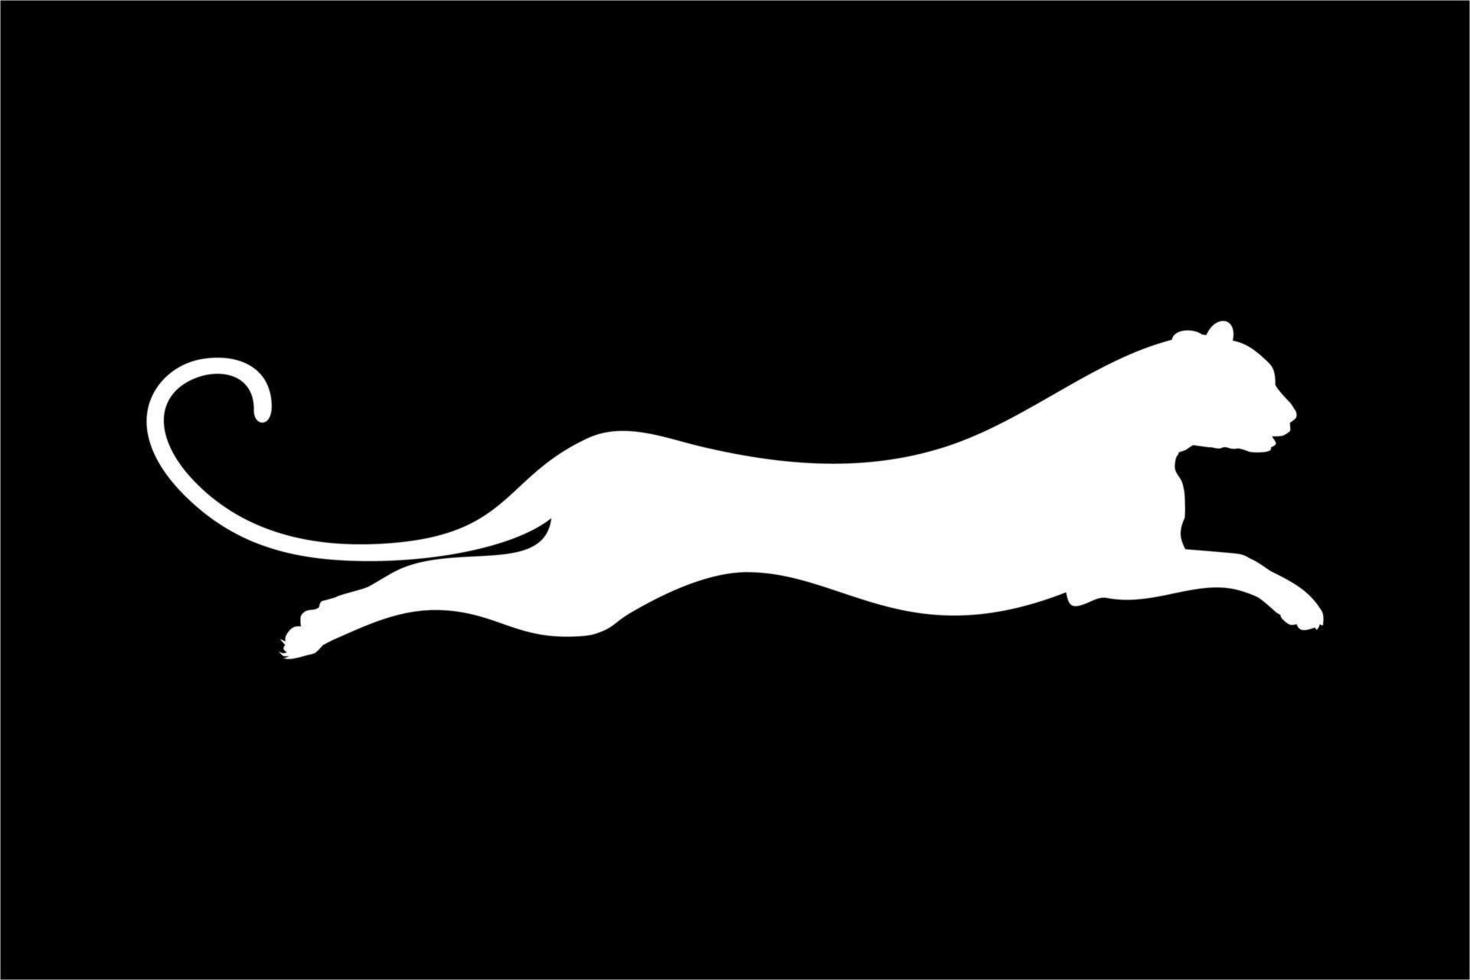 Silhouette of the Jumping Wild Cat, Tiger, Leopard, Panther, Cheetah, Jaguar and Big Cat Family, for Logo, Pictogram, Website, or Graphic Design Element. Vector Illustration